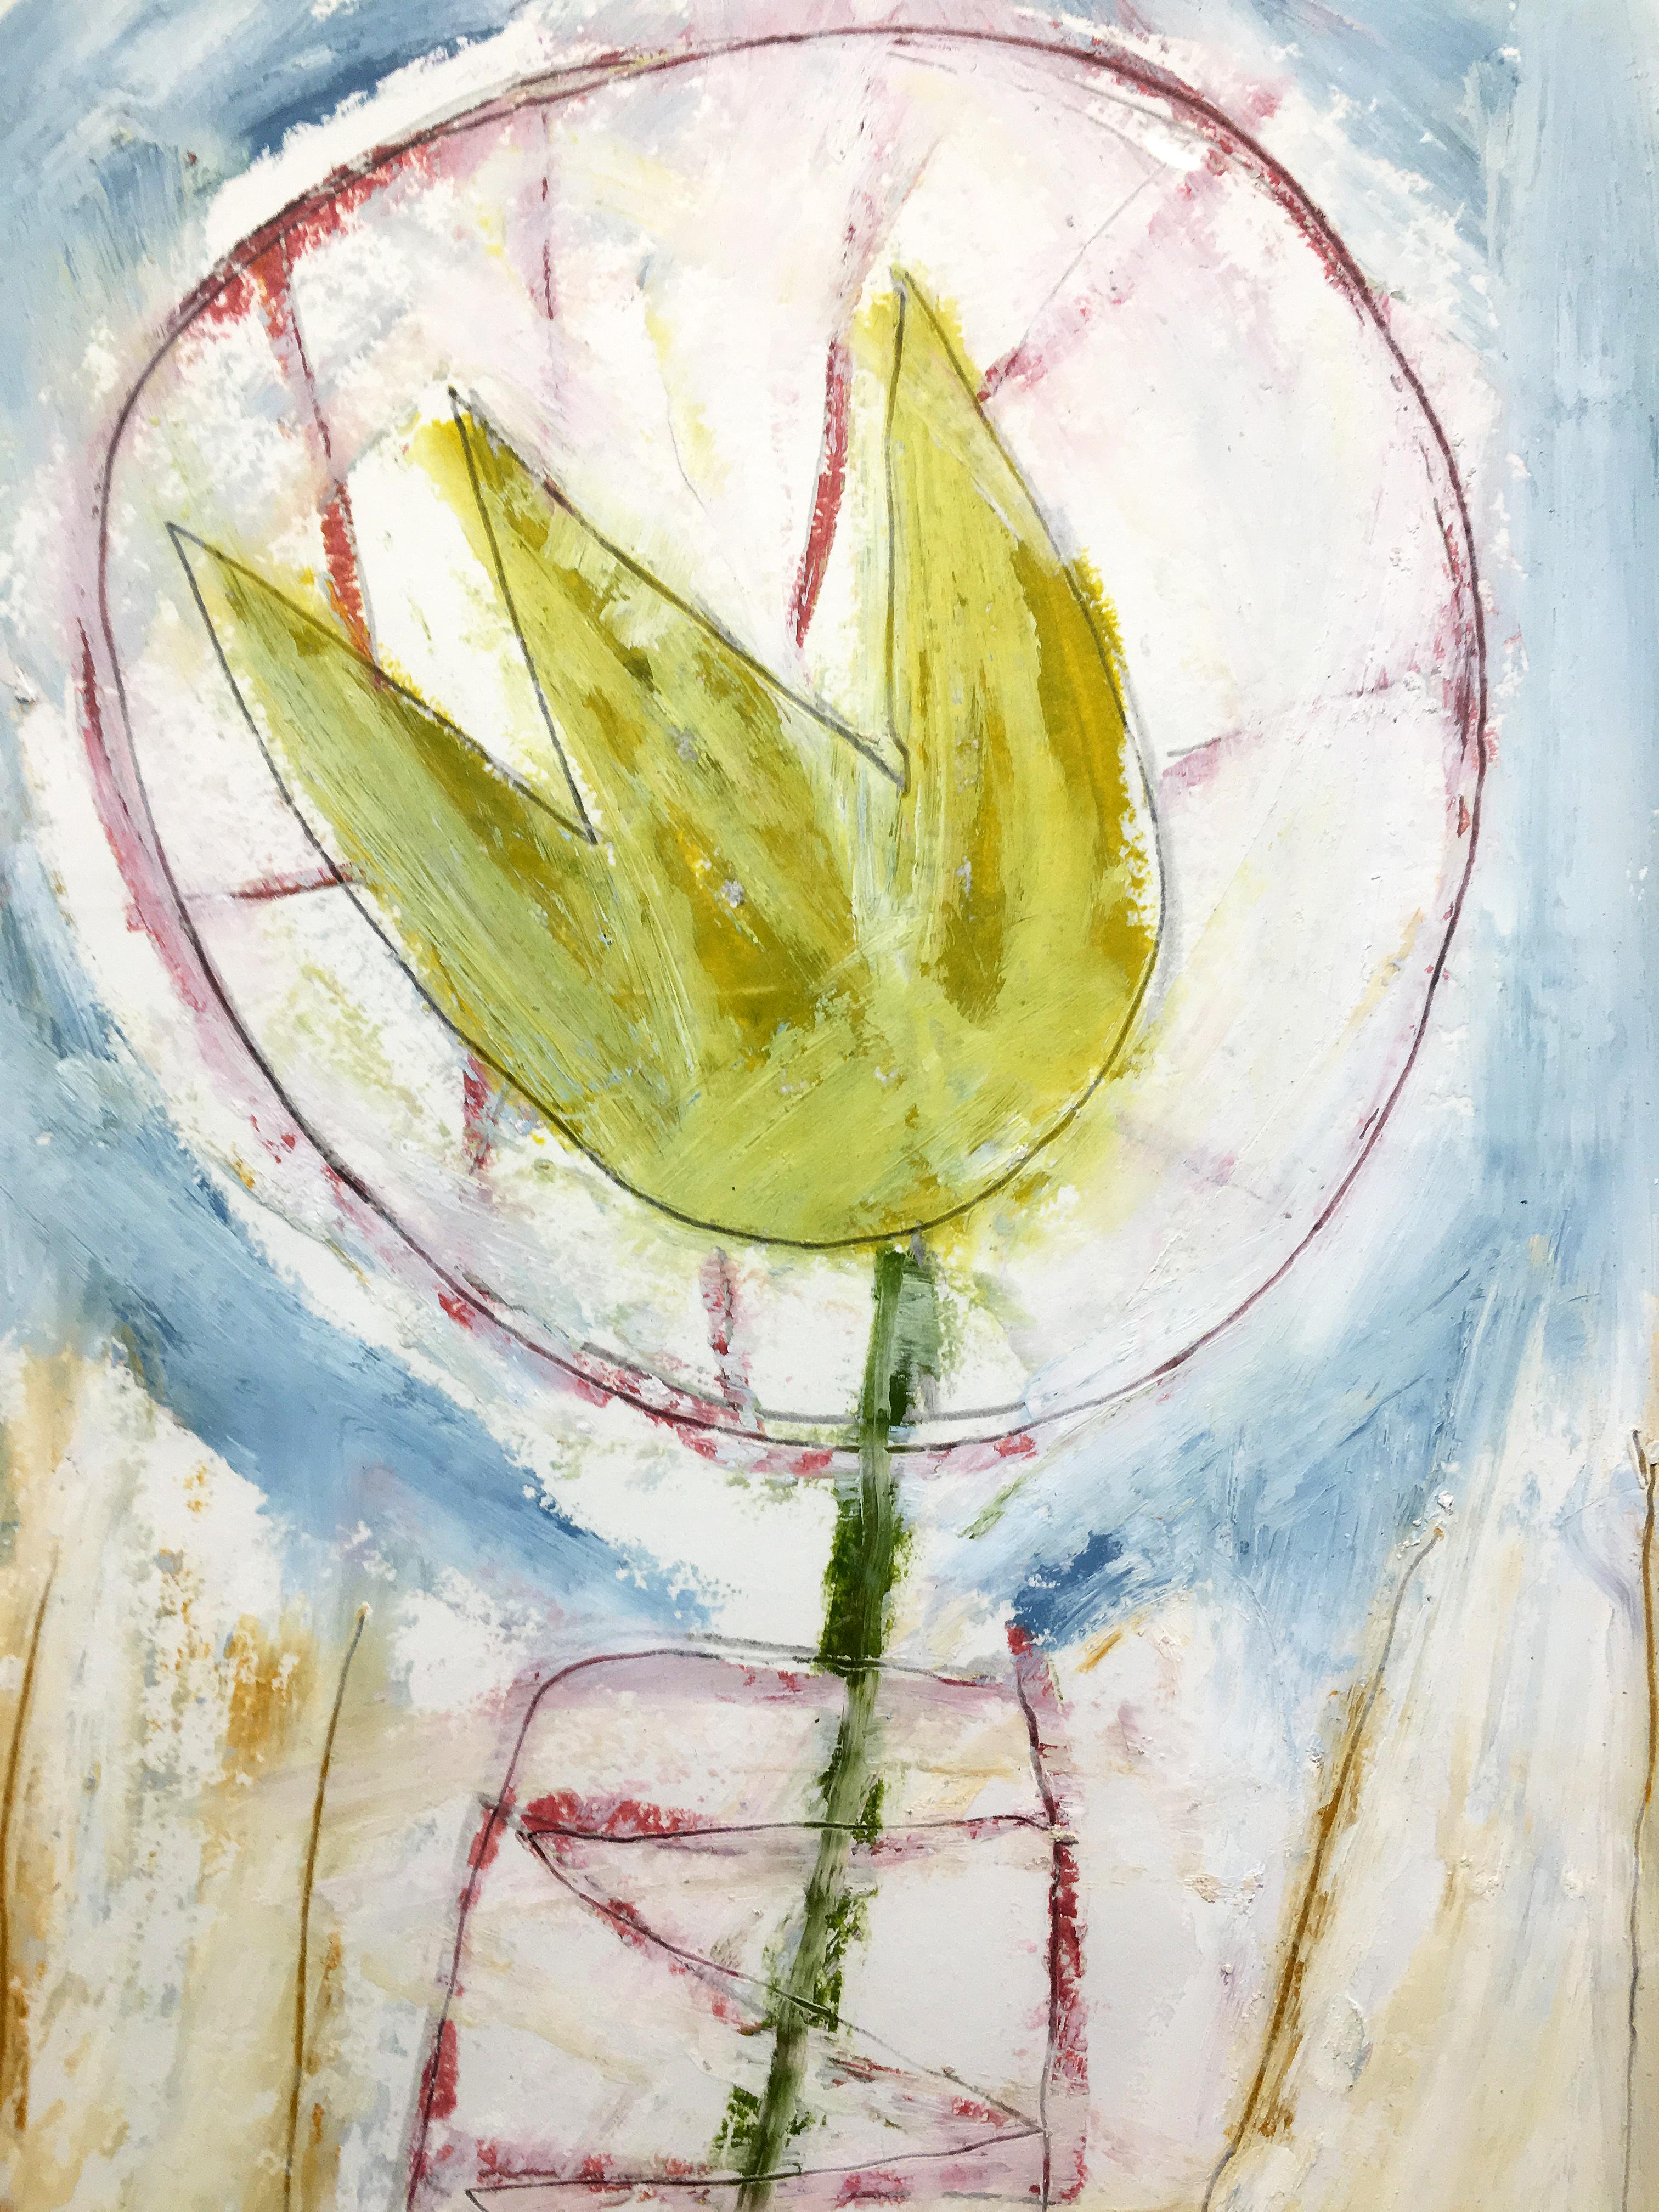 'Mansfield Tulip' by Adam Handler, 2018. Oil stick on paper, 12 x 8 in. / Frame: 17.25 x 13 in. This work on paper by American artist Adam Handler depicts a tulip in his signature naive, child-like style. Swaying to the left, the black tulip is